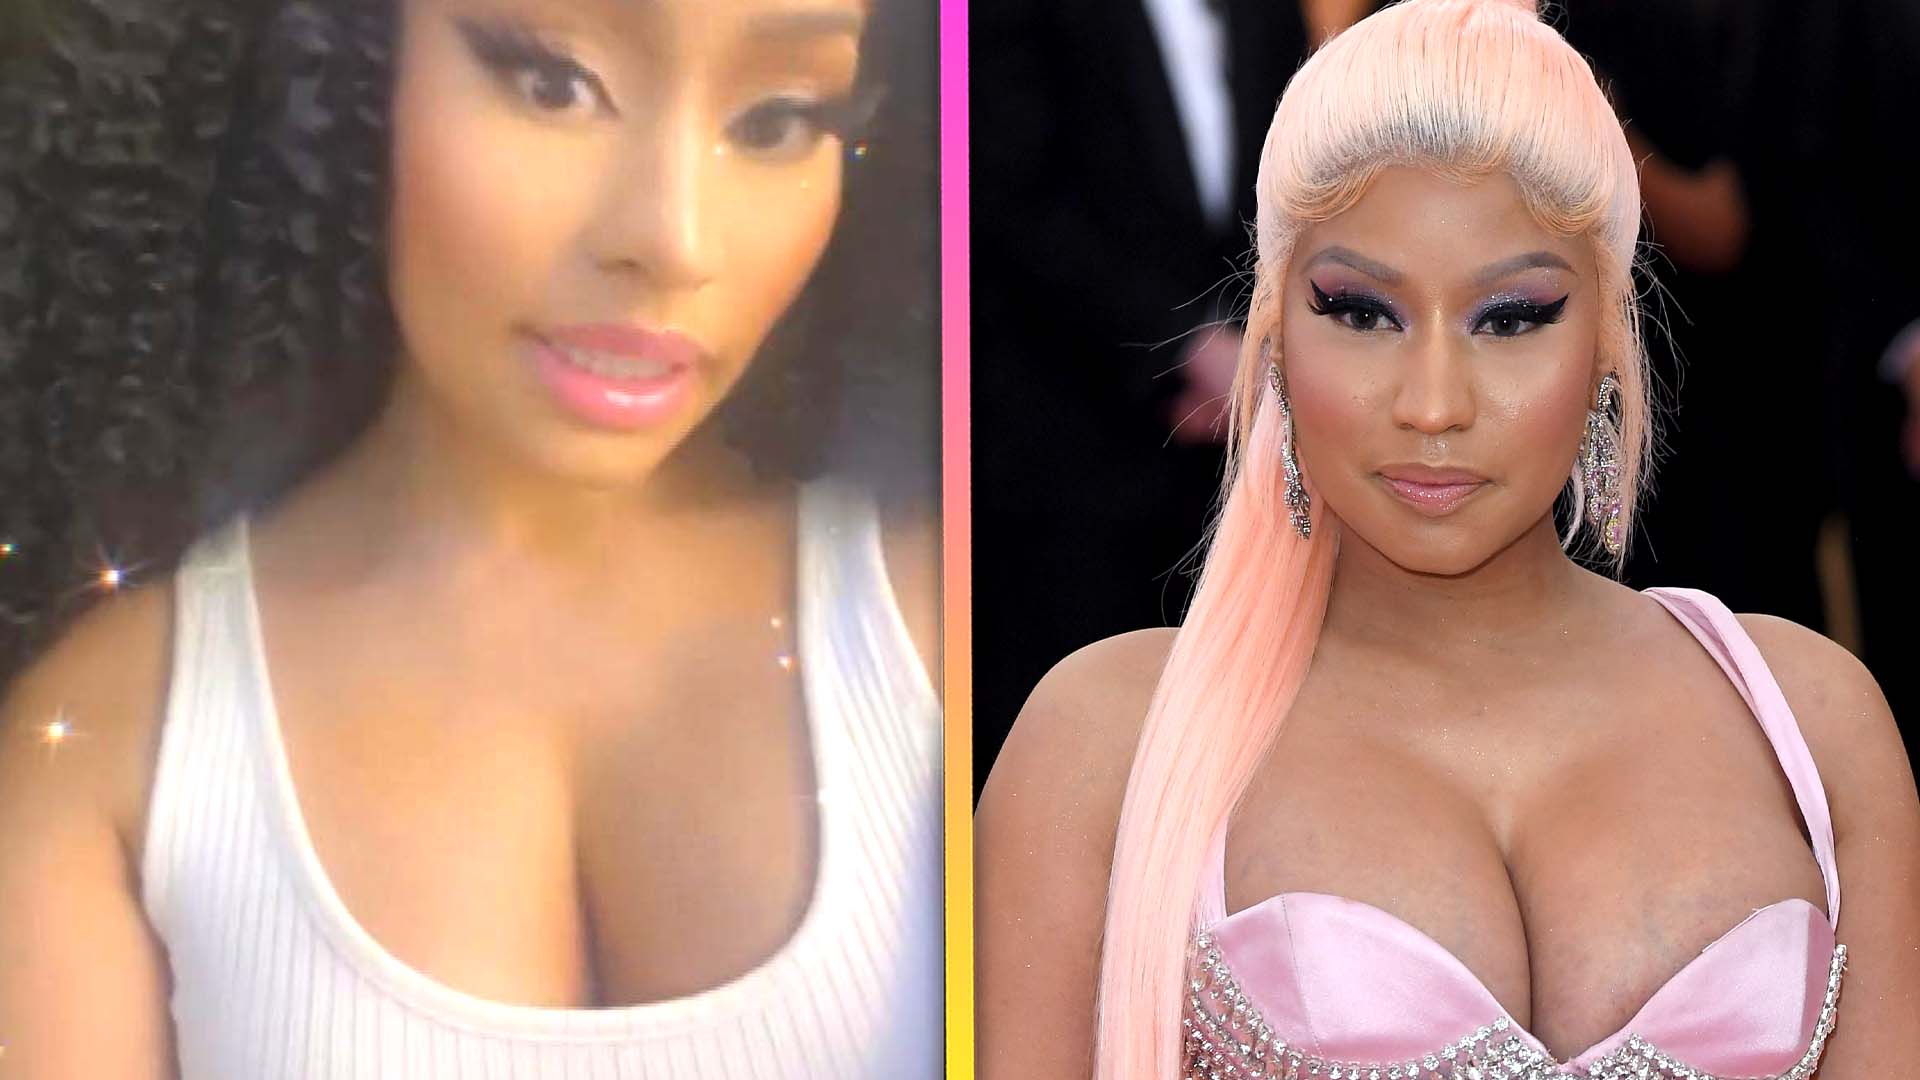 Nicki Minaj forced to get breast reduction as 'ti**ies wouldn't